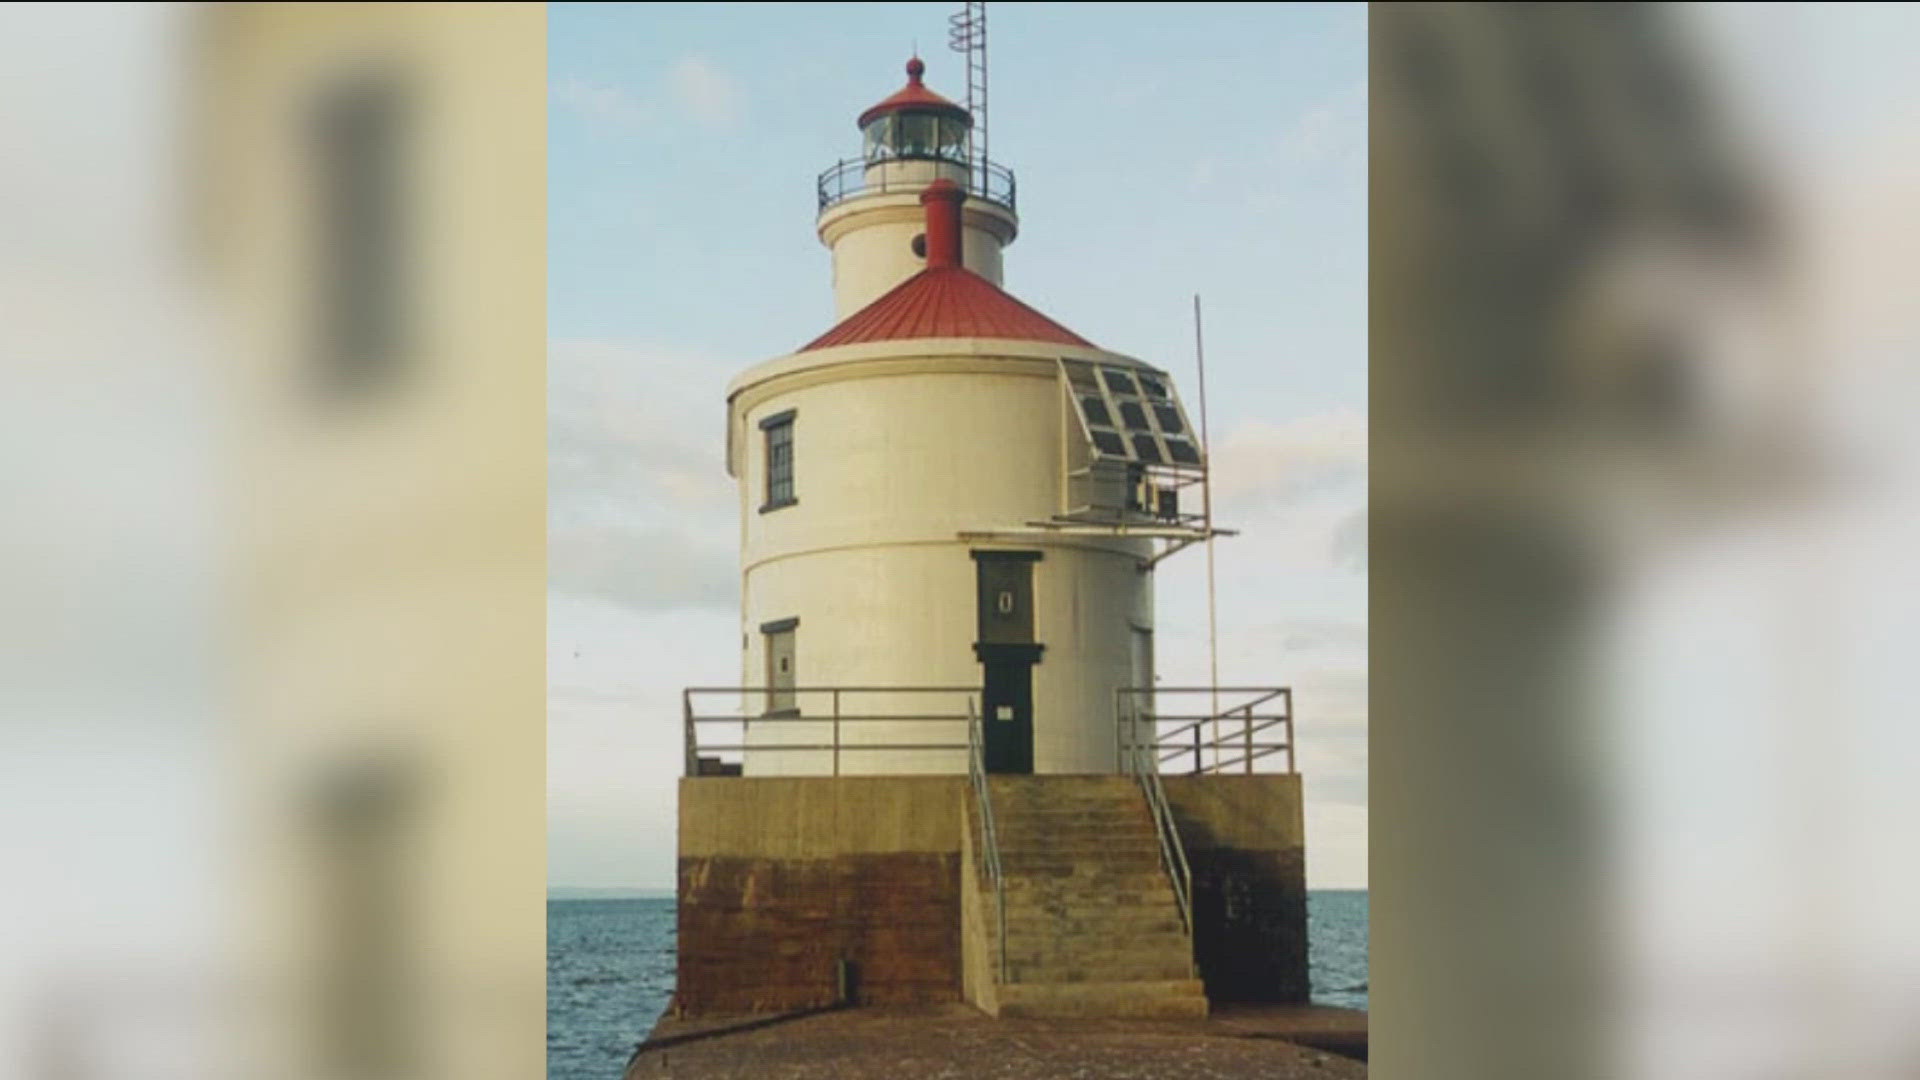 If your agency or nonprofit can take on the upkeep of a historic lighthouse, this 56-foot tower on Lake Superior could be yours.